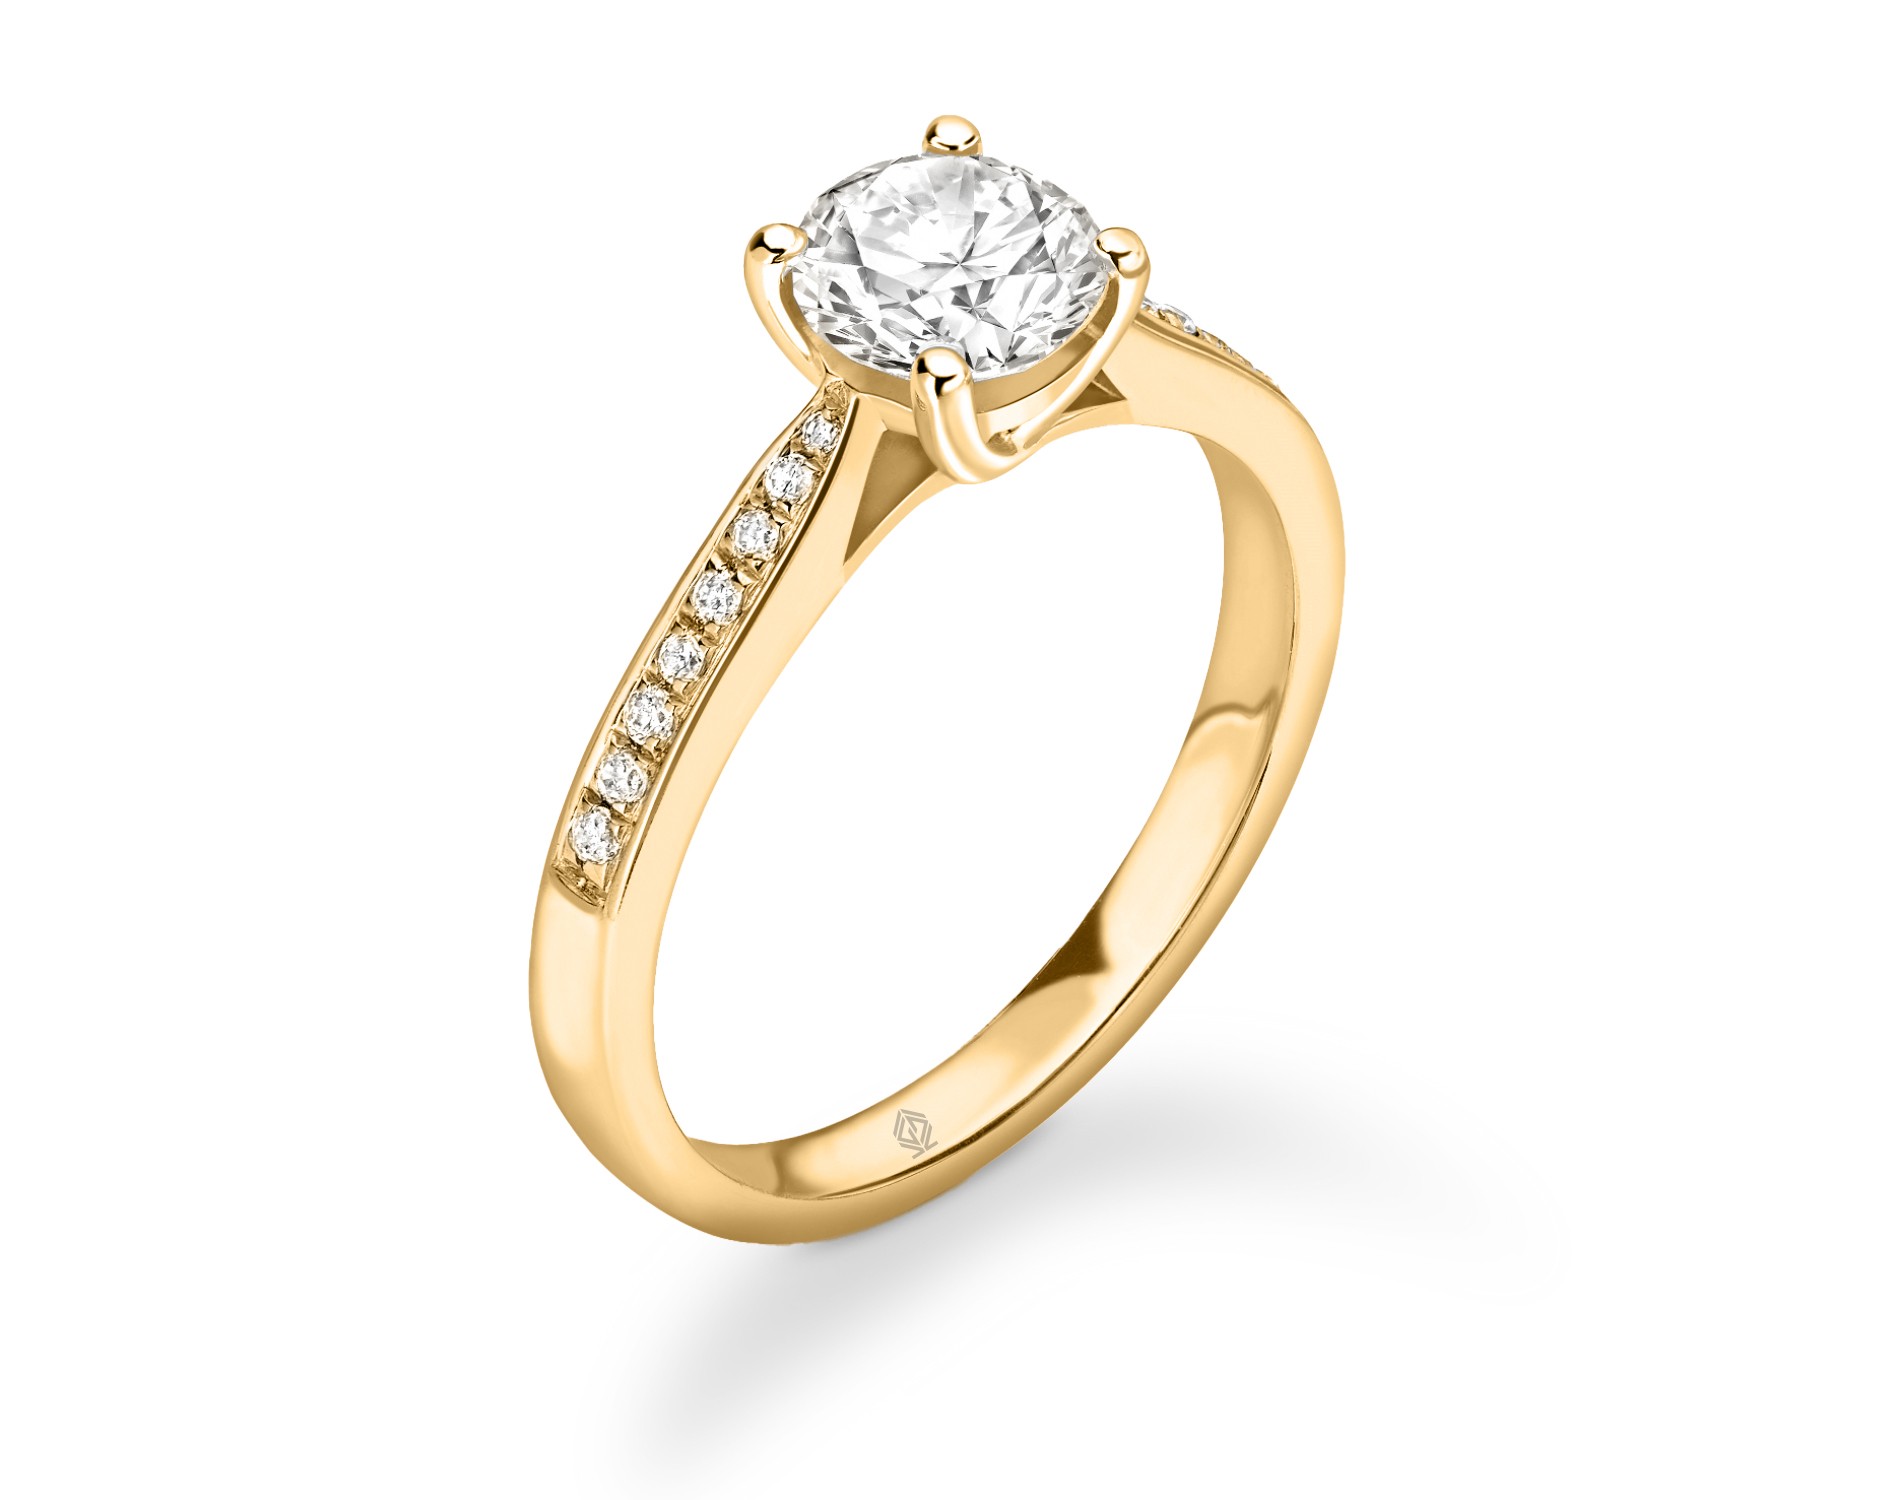 18K YELLOW GOLD ROUND CUT DIAMOND RING WITH SIDE STONES CHANNEL SET